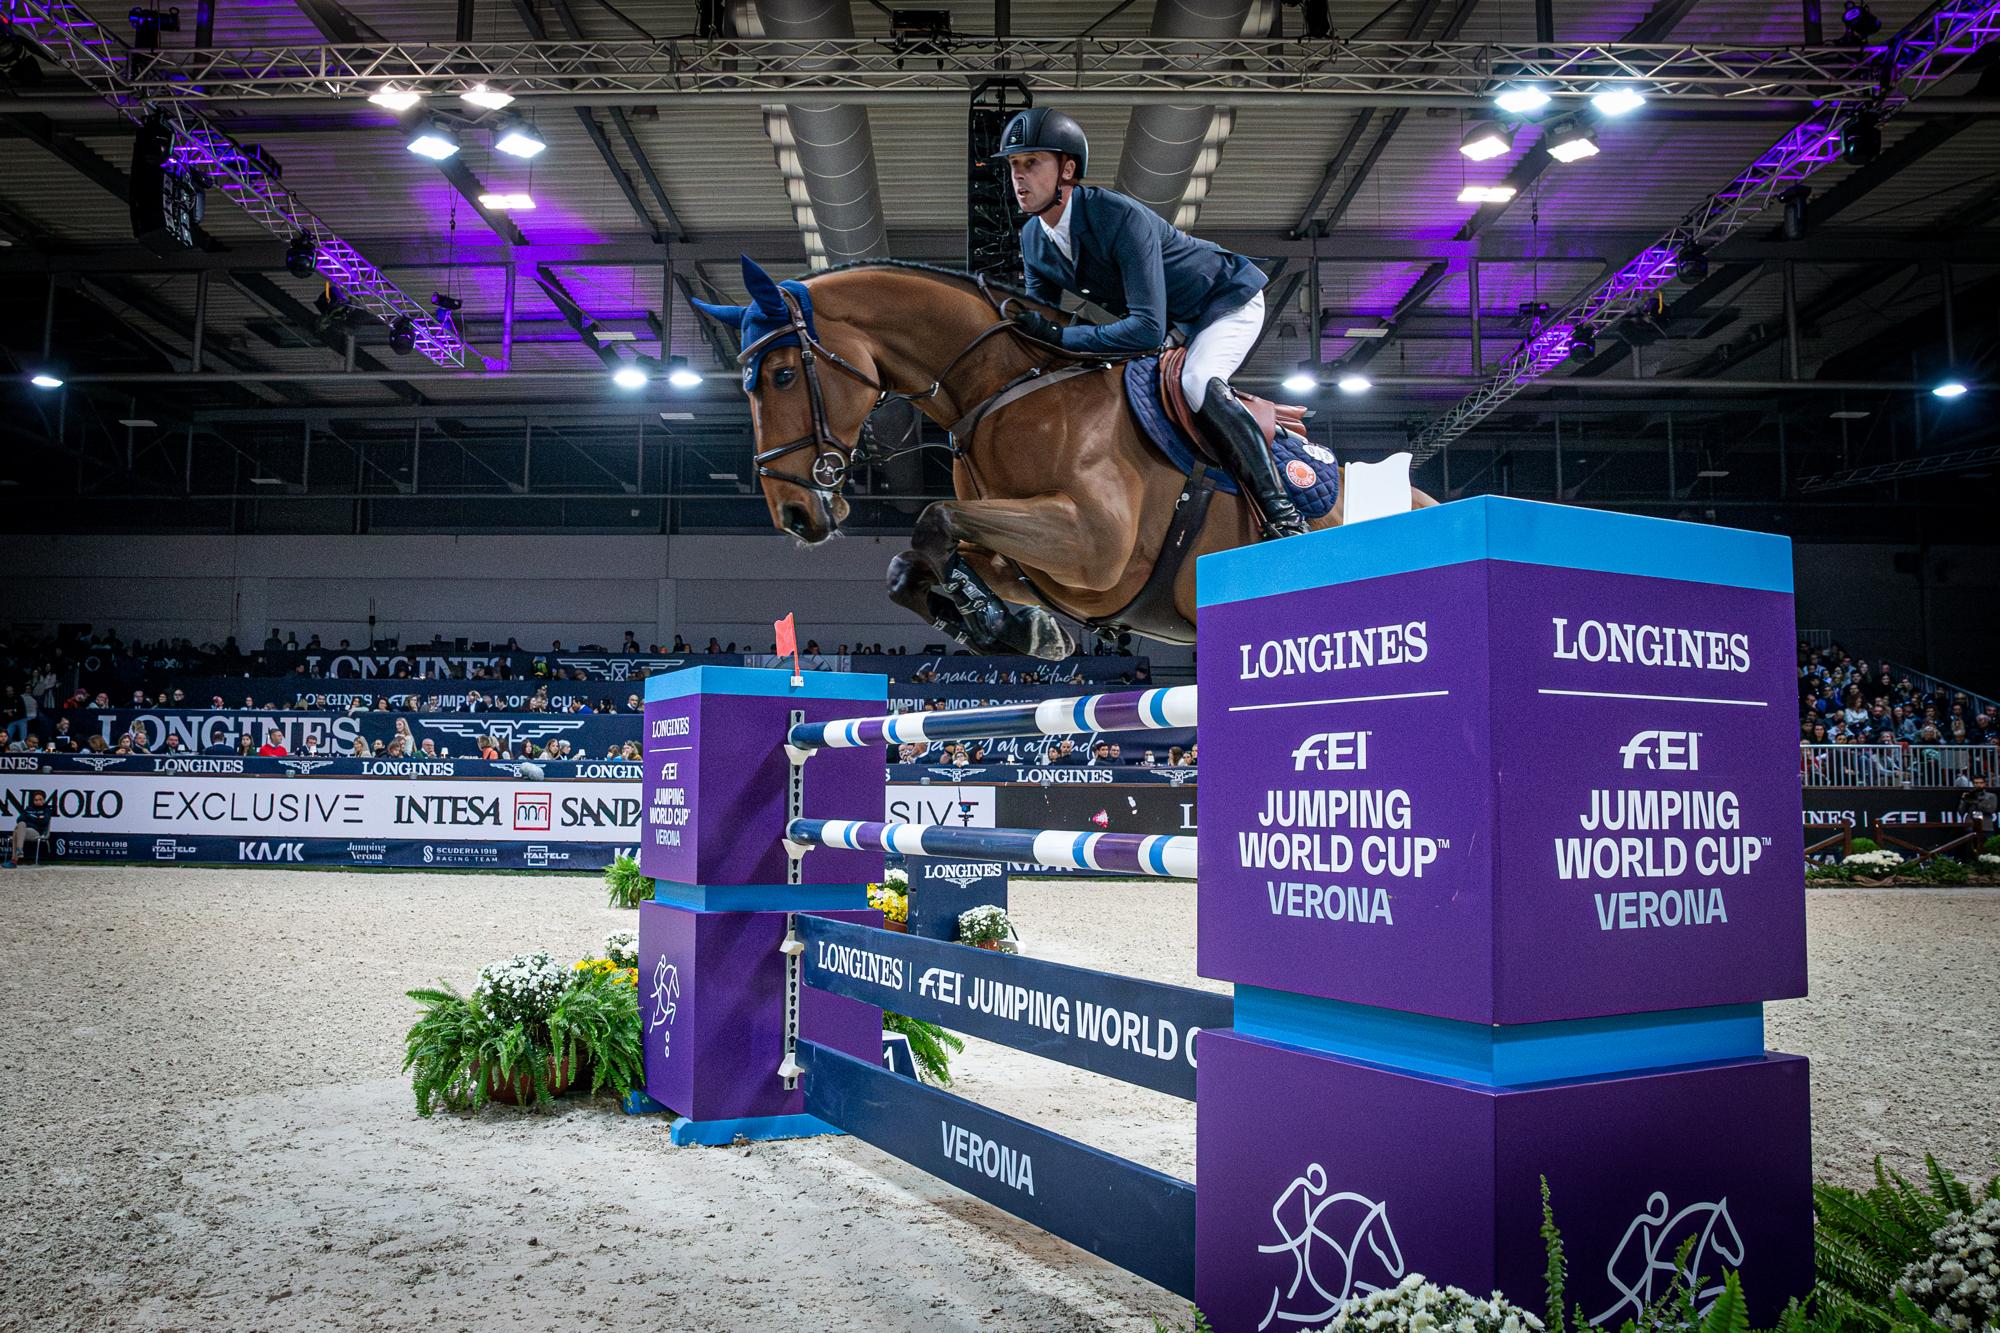 Ben Maher: "Marcus just got me there at the last jump I think!"